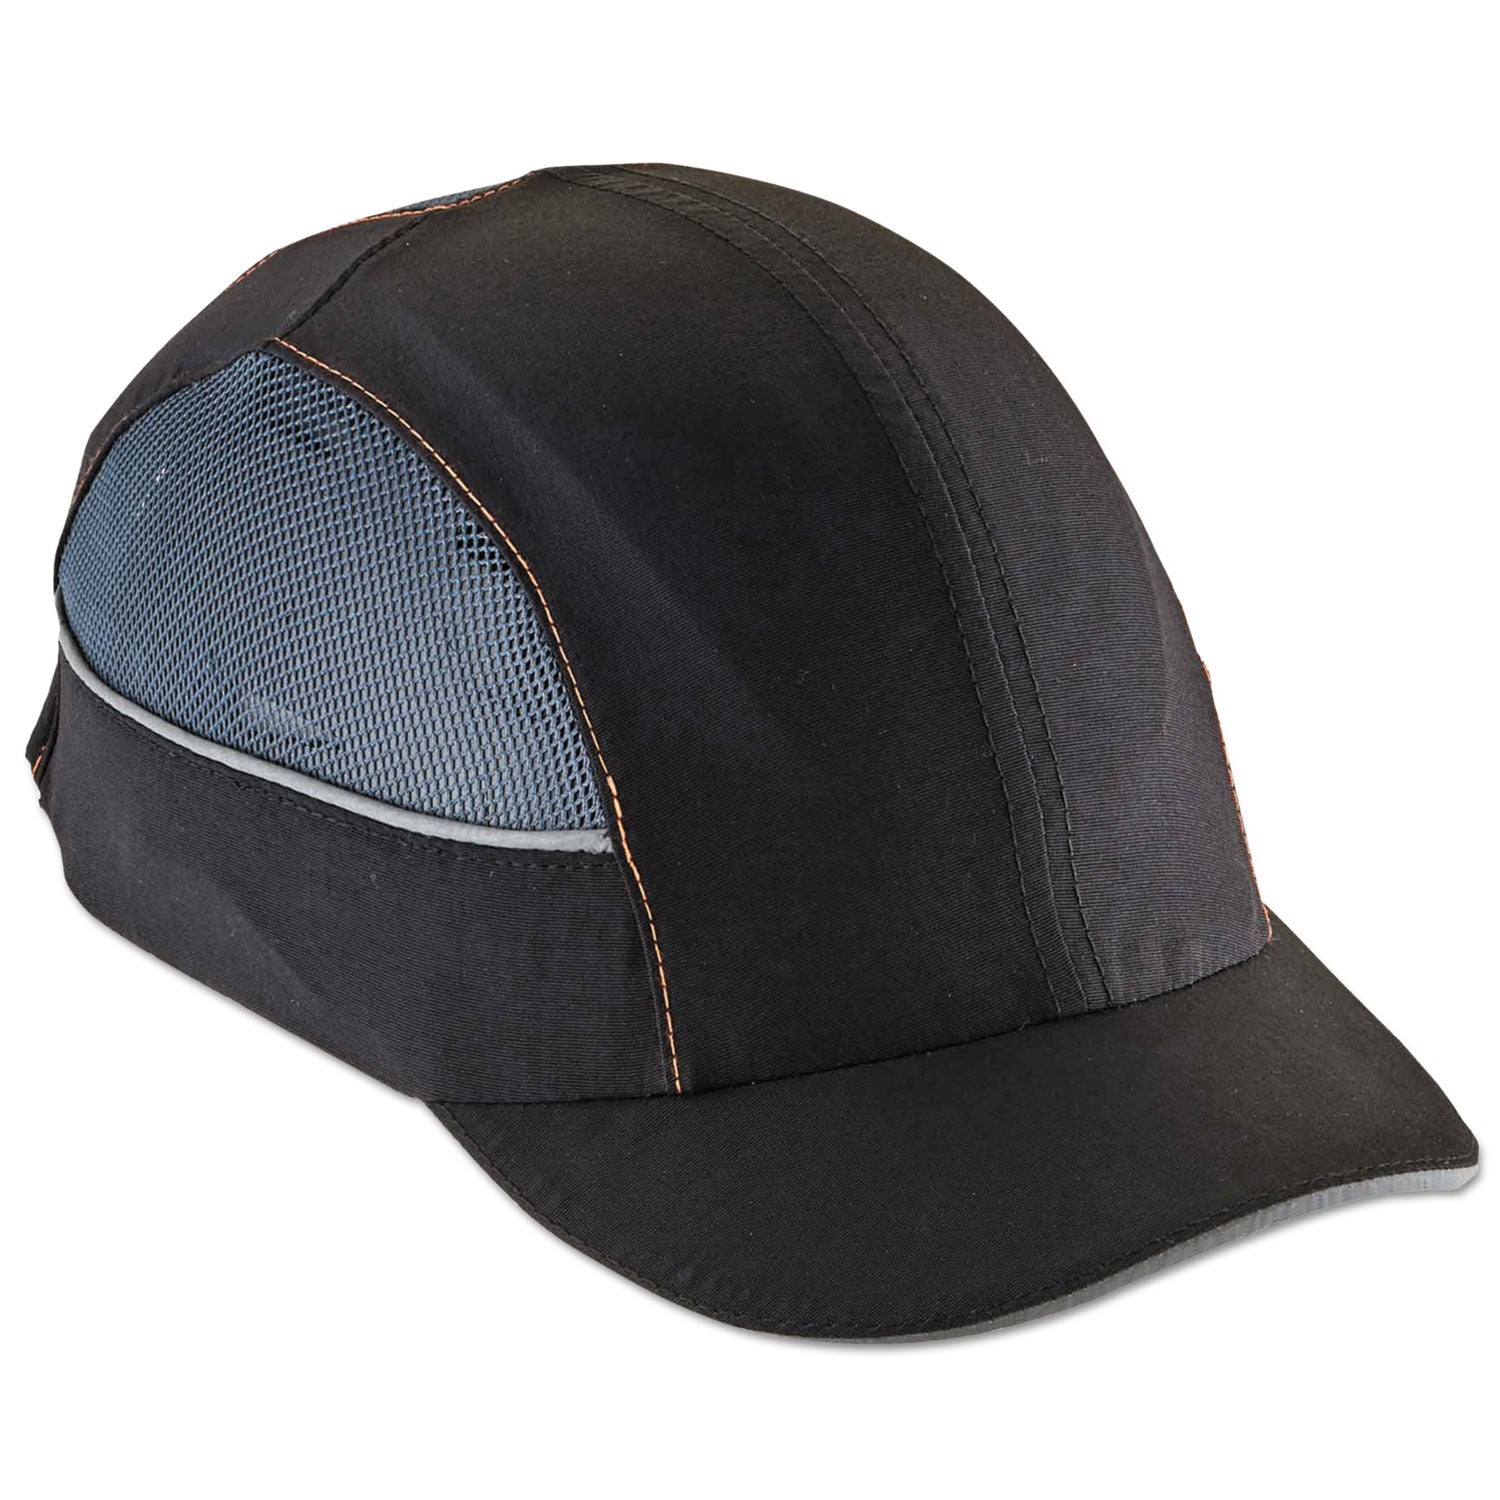 skullerz-8960-bump-cap-with-led-lighting-long-brim-navy-ships-in-1-3-business-days_ego23375 - 1